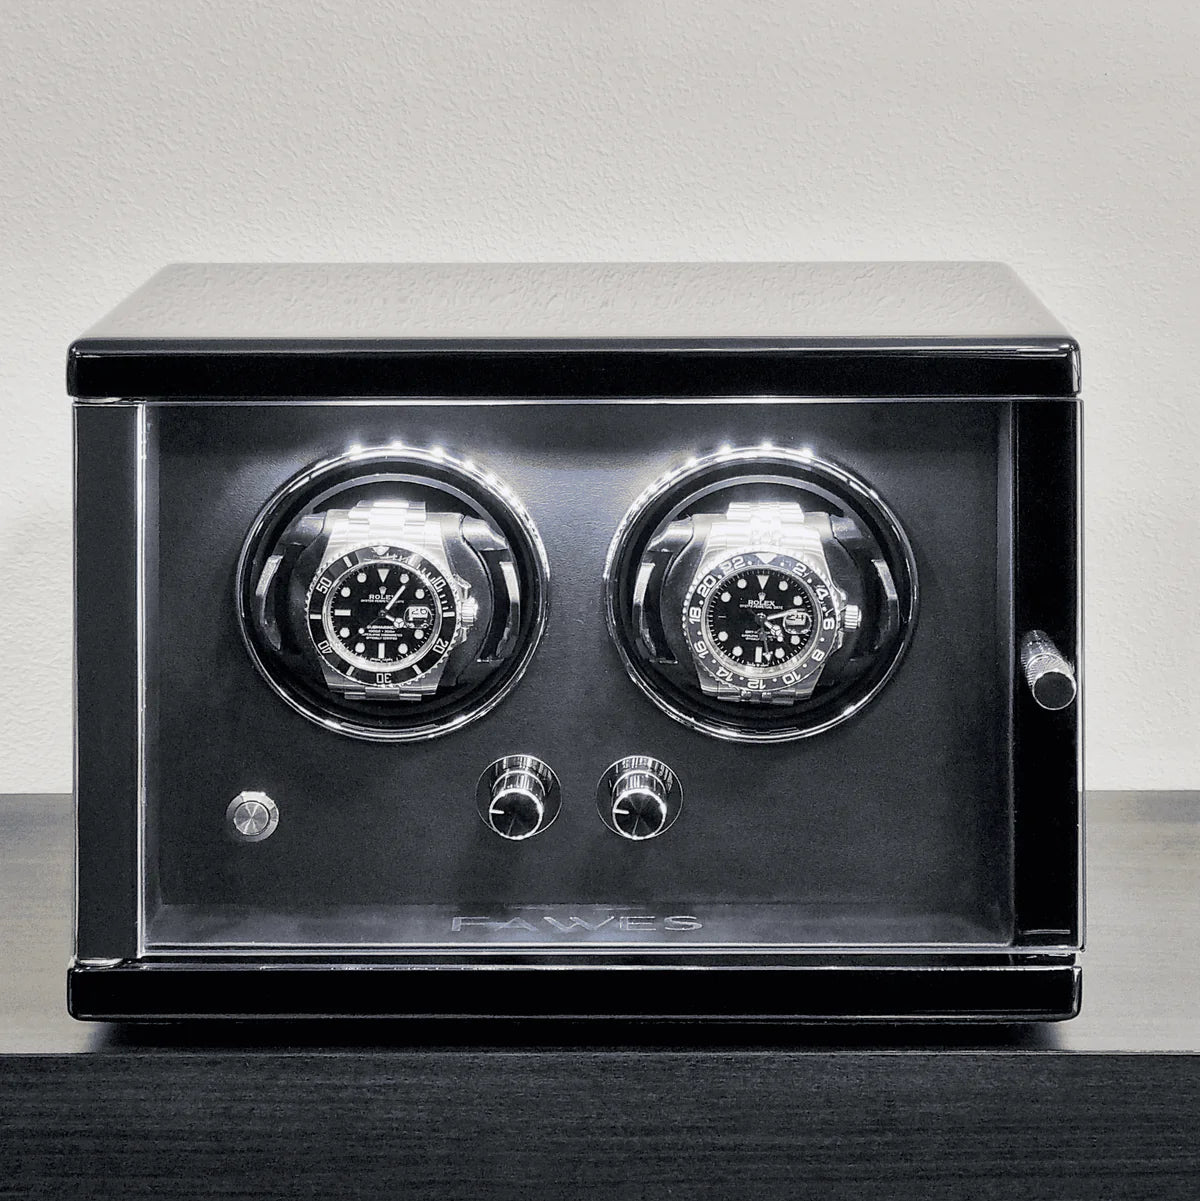 Fawes Automatic Watch Winder Classic X31